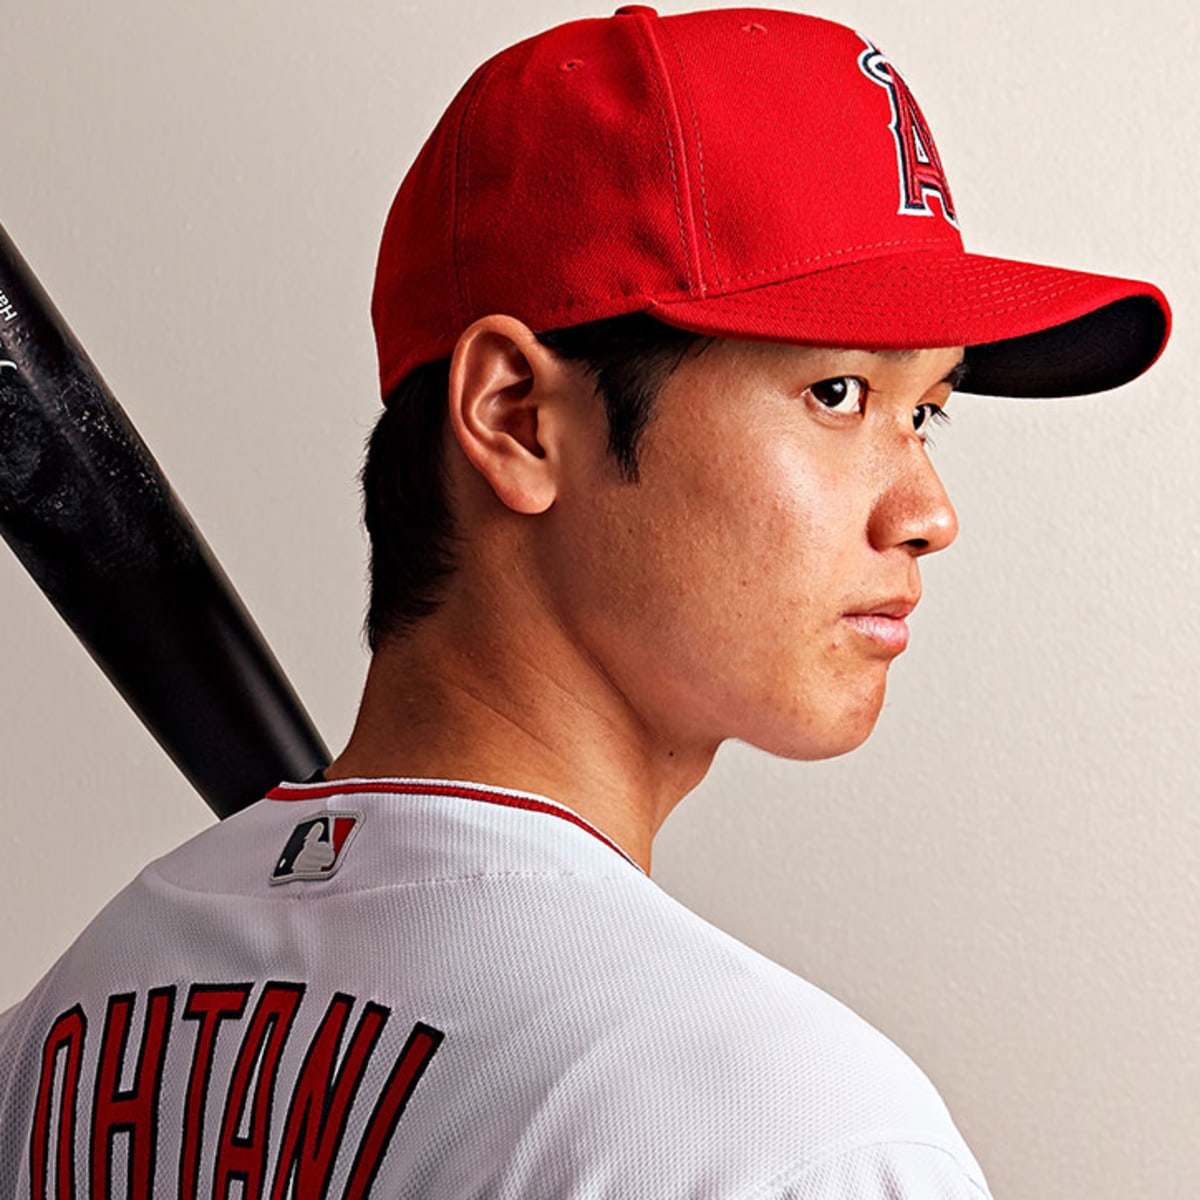 Rays Should Go All-In on Shohei Ohtani for World Series Push amid